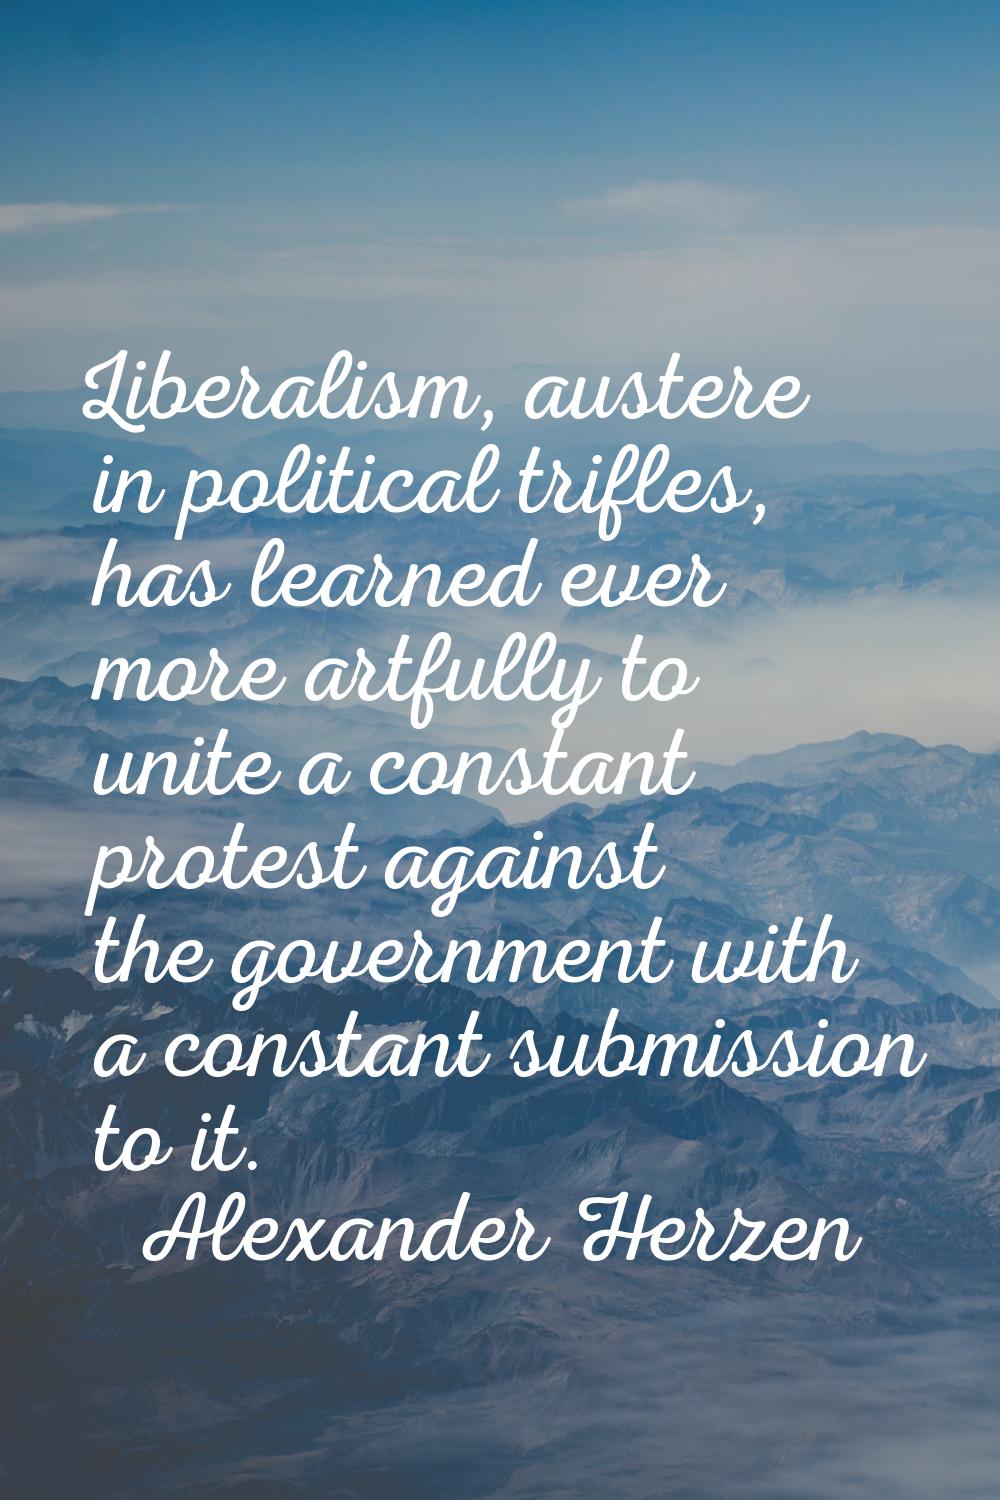 Liberalism, austere in political trifles, has learned ever more artfully to unite a constant protes